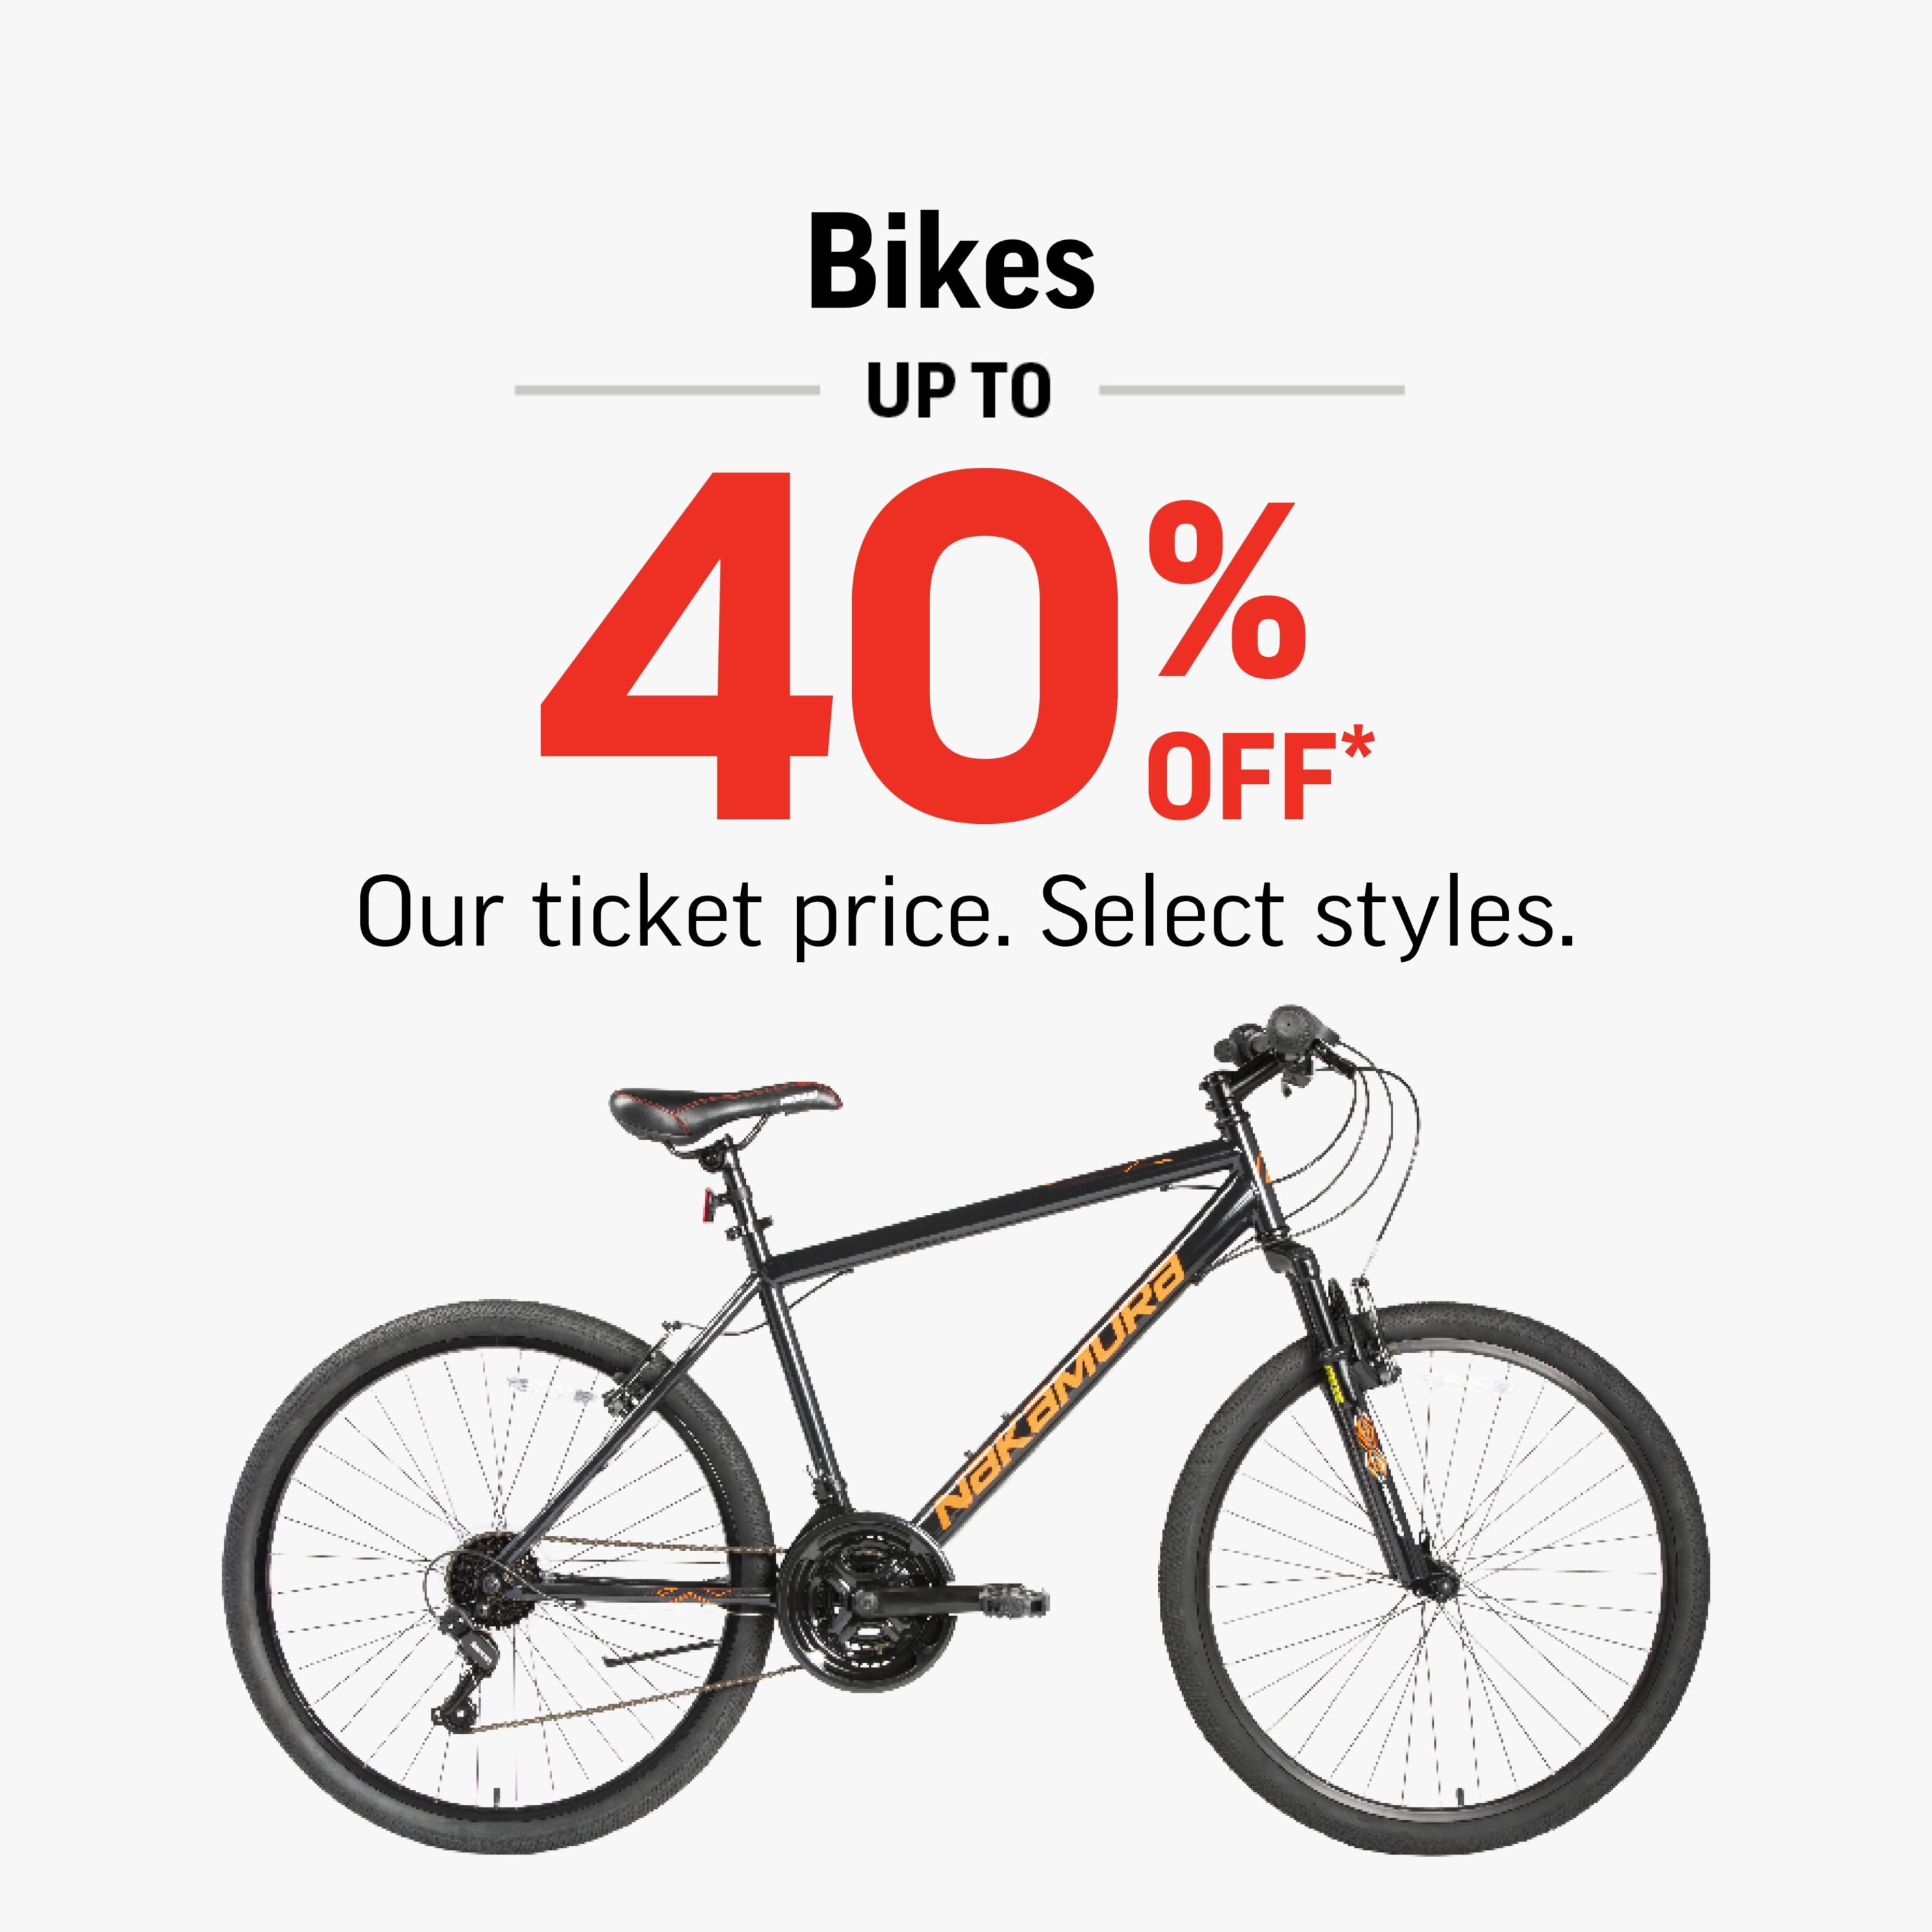 Bikes Up To 40% Off!